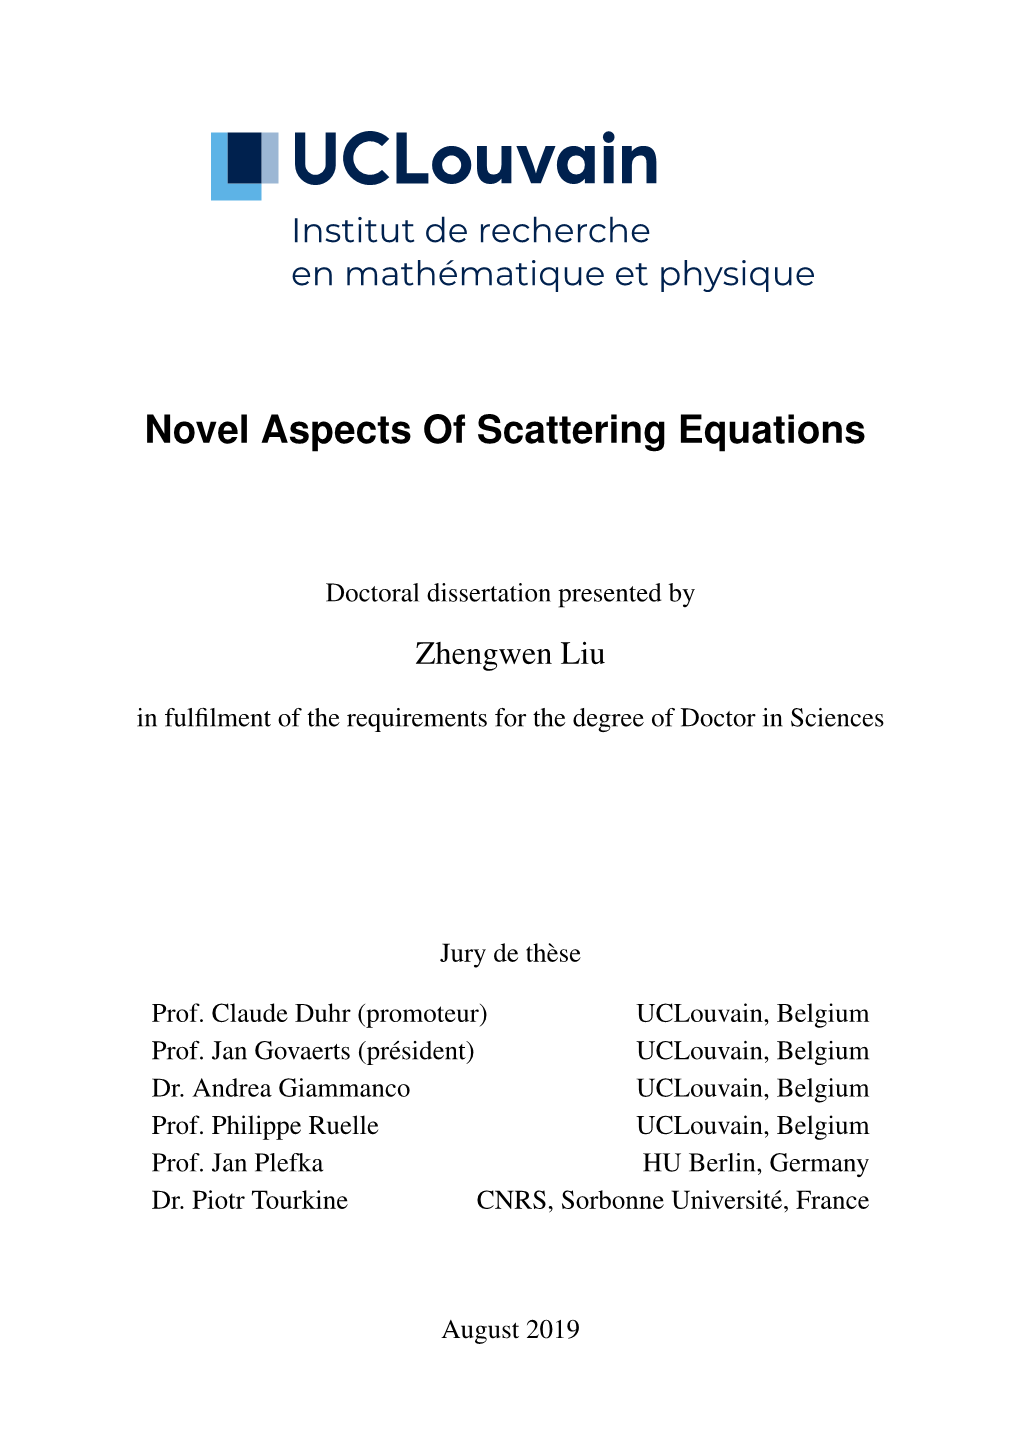 Novel Aspects of Scattering Equations